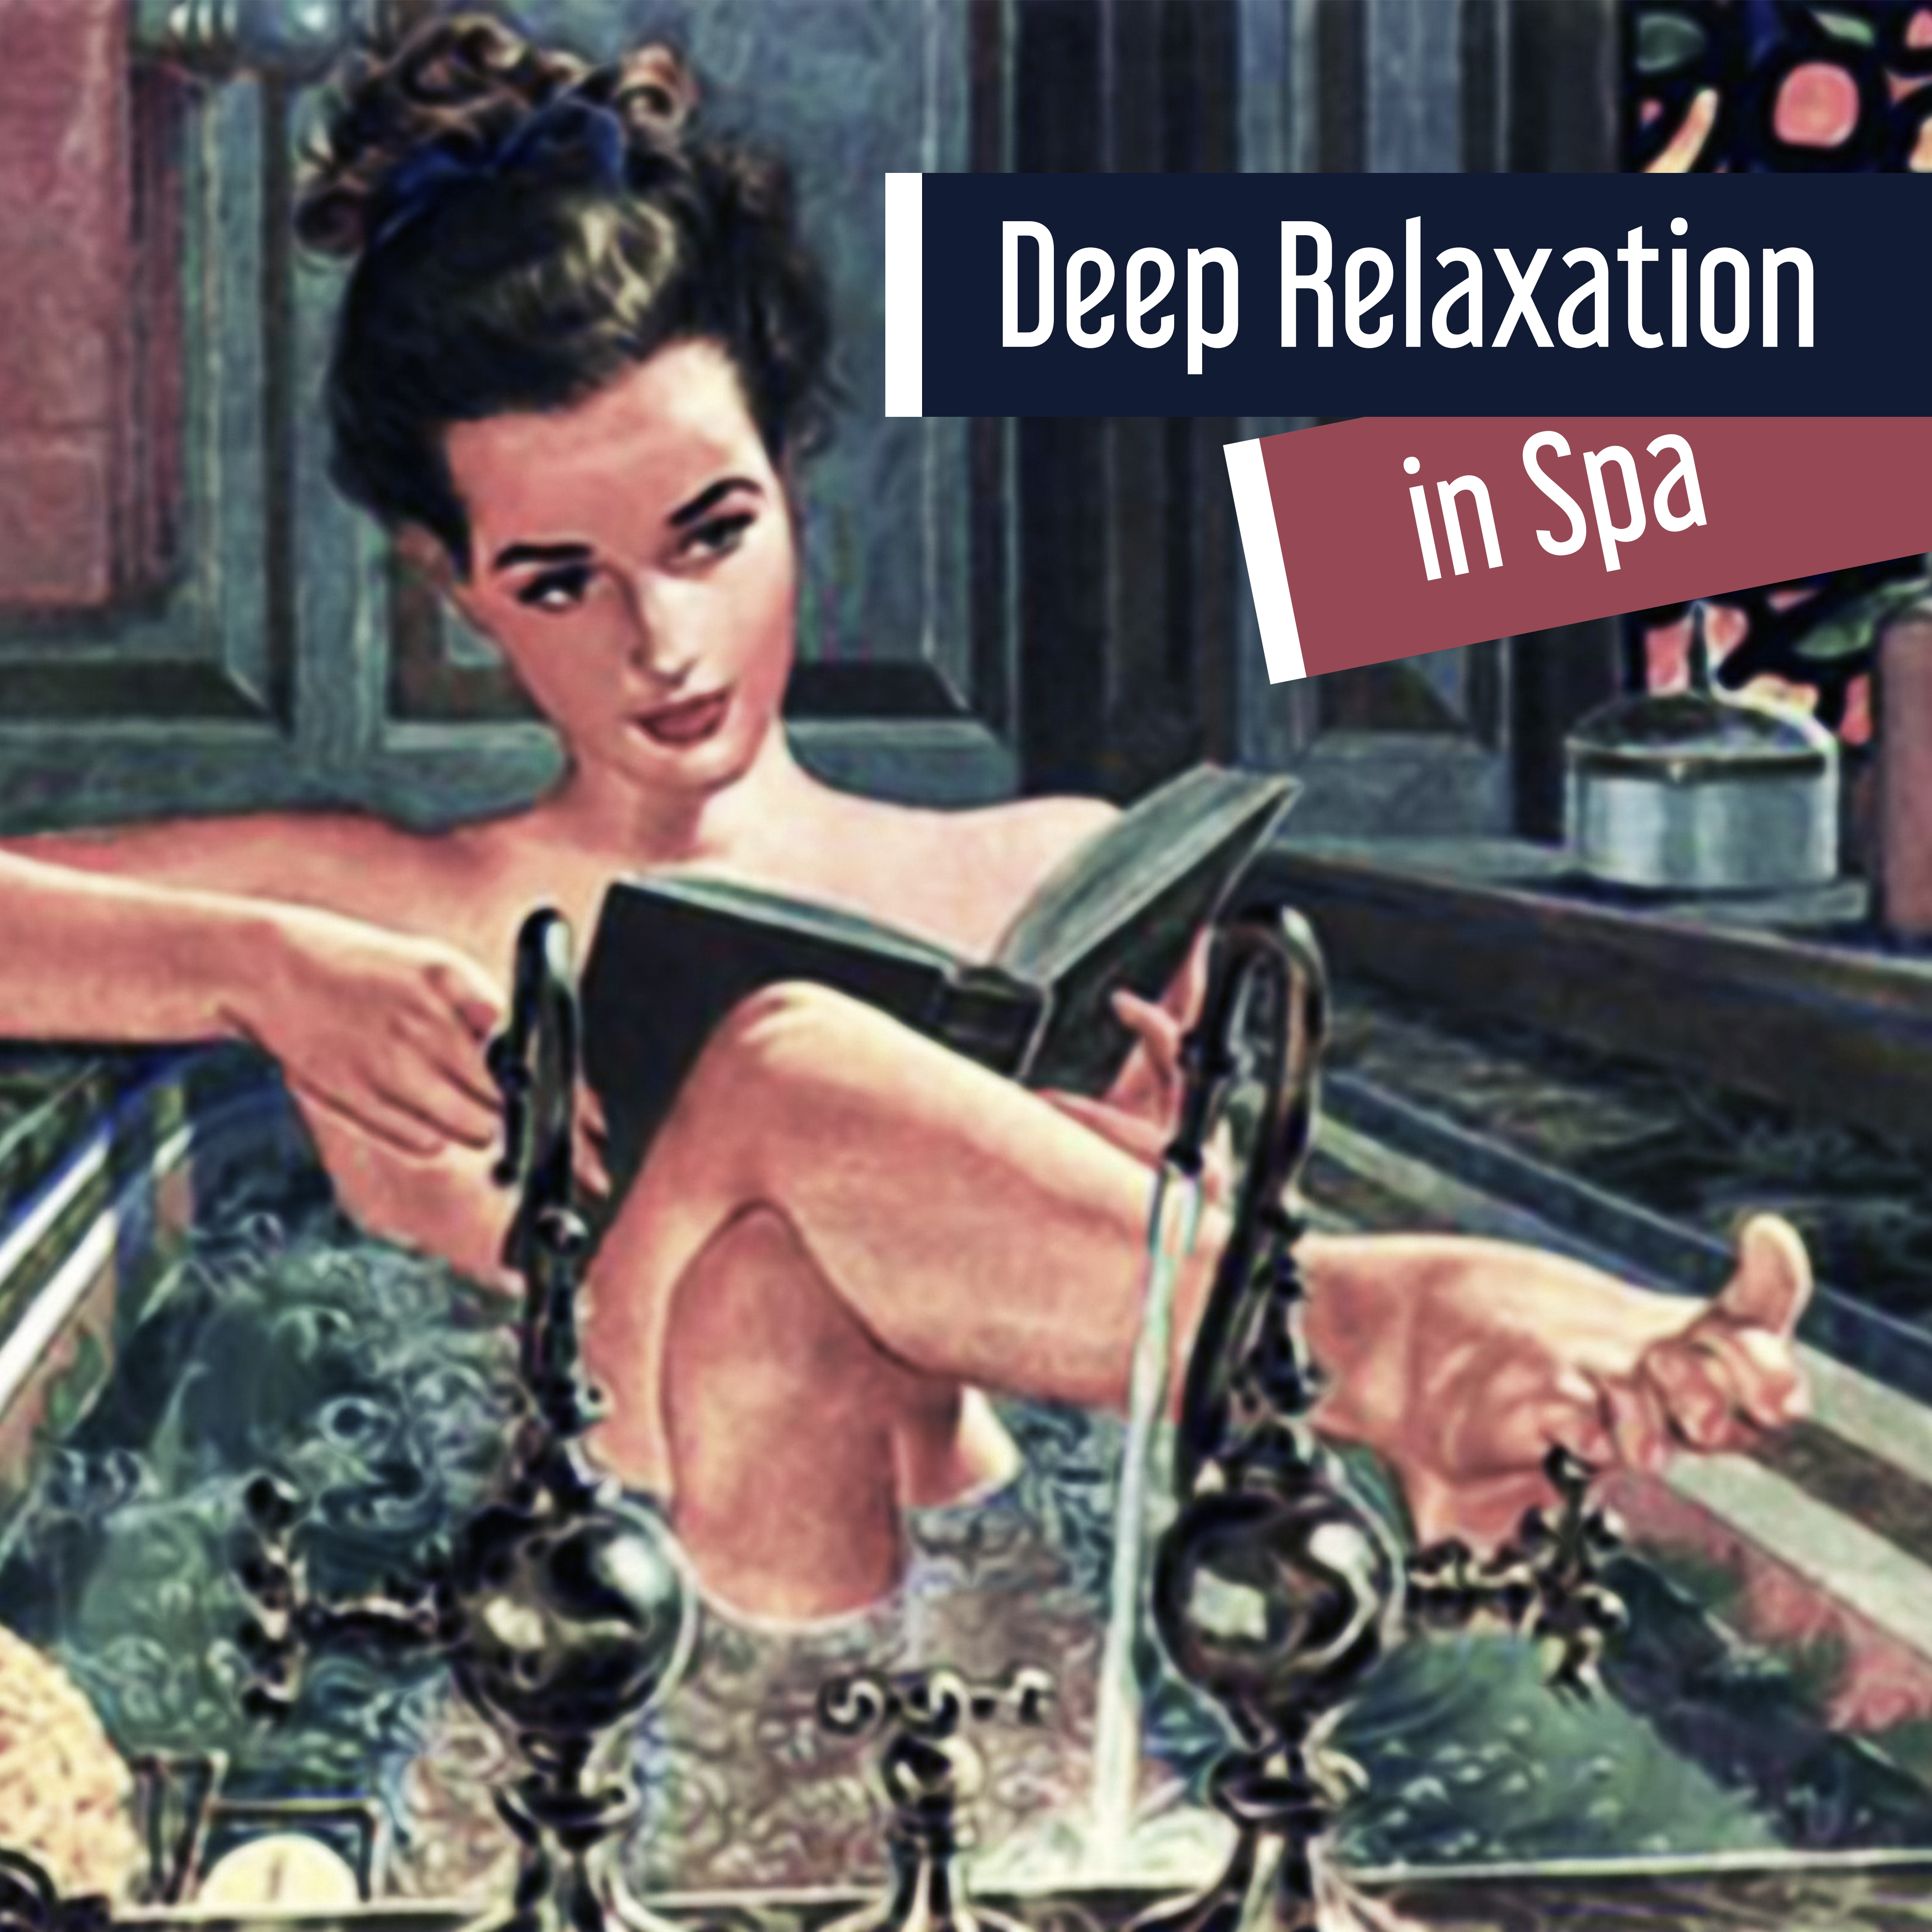 Deep Relaxation in Spa – Peaceful Mind, Pure Massage, Soft Music for Wellness, Stress Free, Meditation, Spa Music